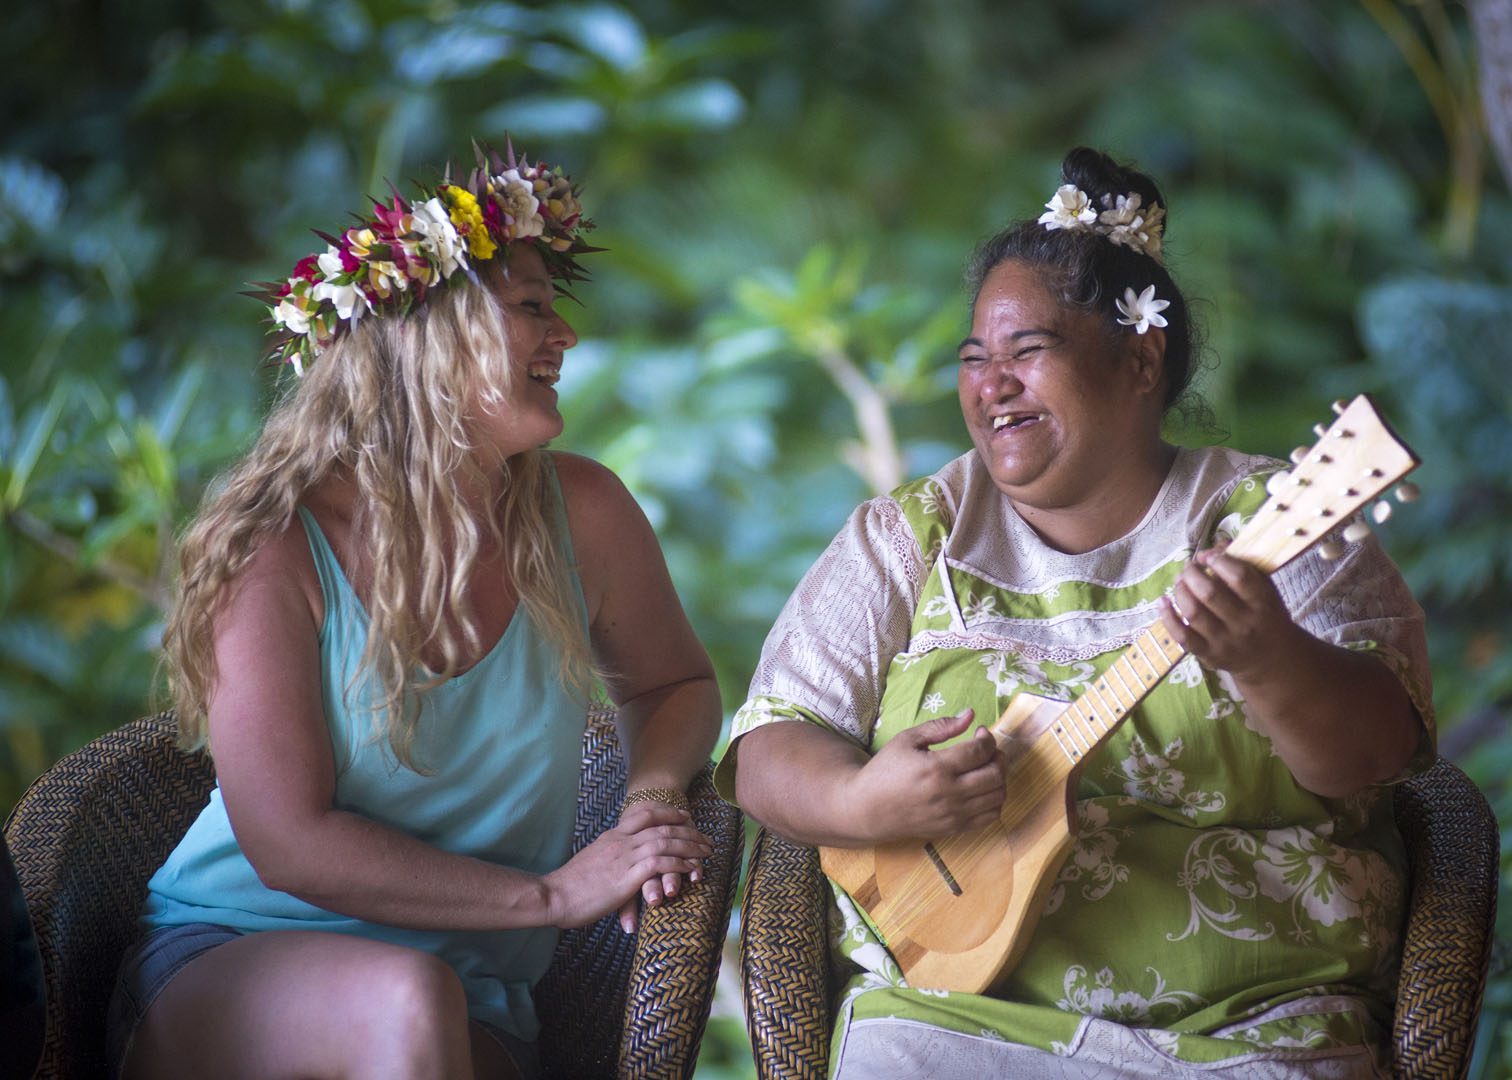 A friendly image of a resort guest enjoying the entertainment performed  solo by a dedicated staff, playing ukulele